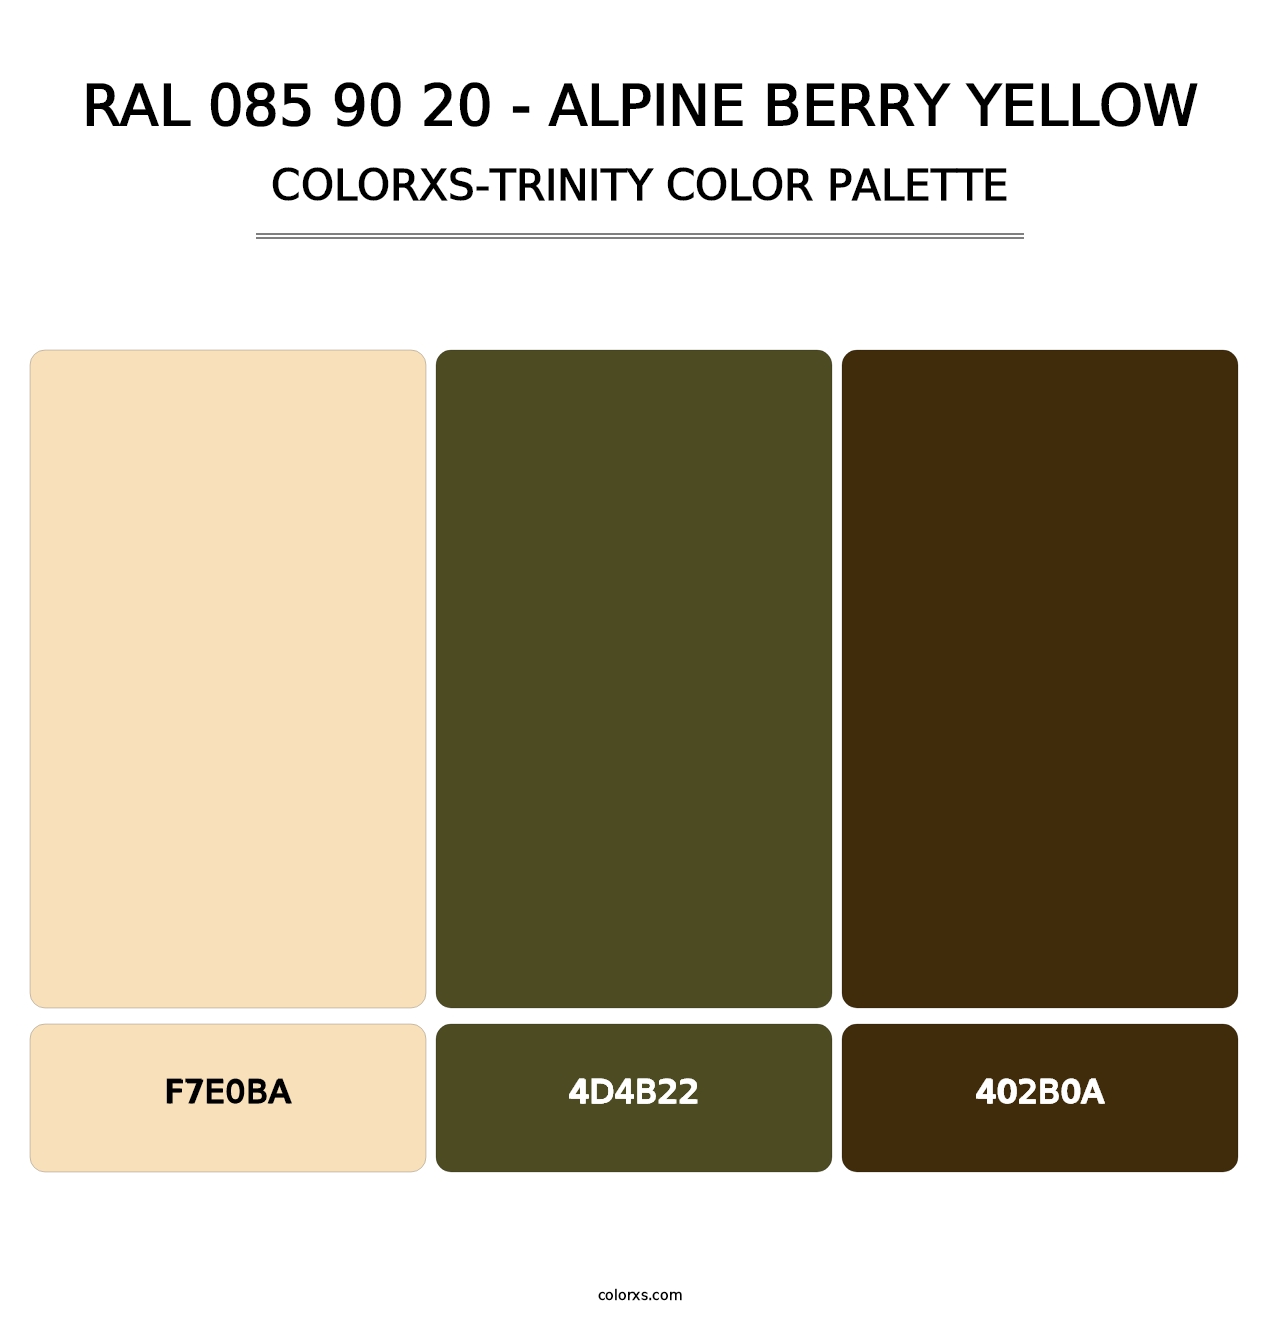 RAL 085 90 20 - Alpine Berry Yellow - Colorxs Trinity Palette